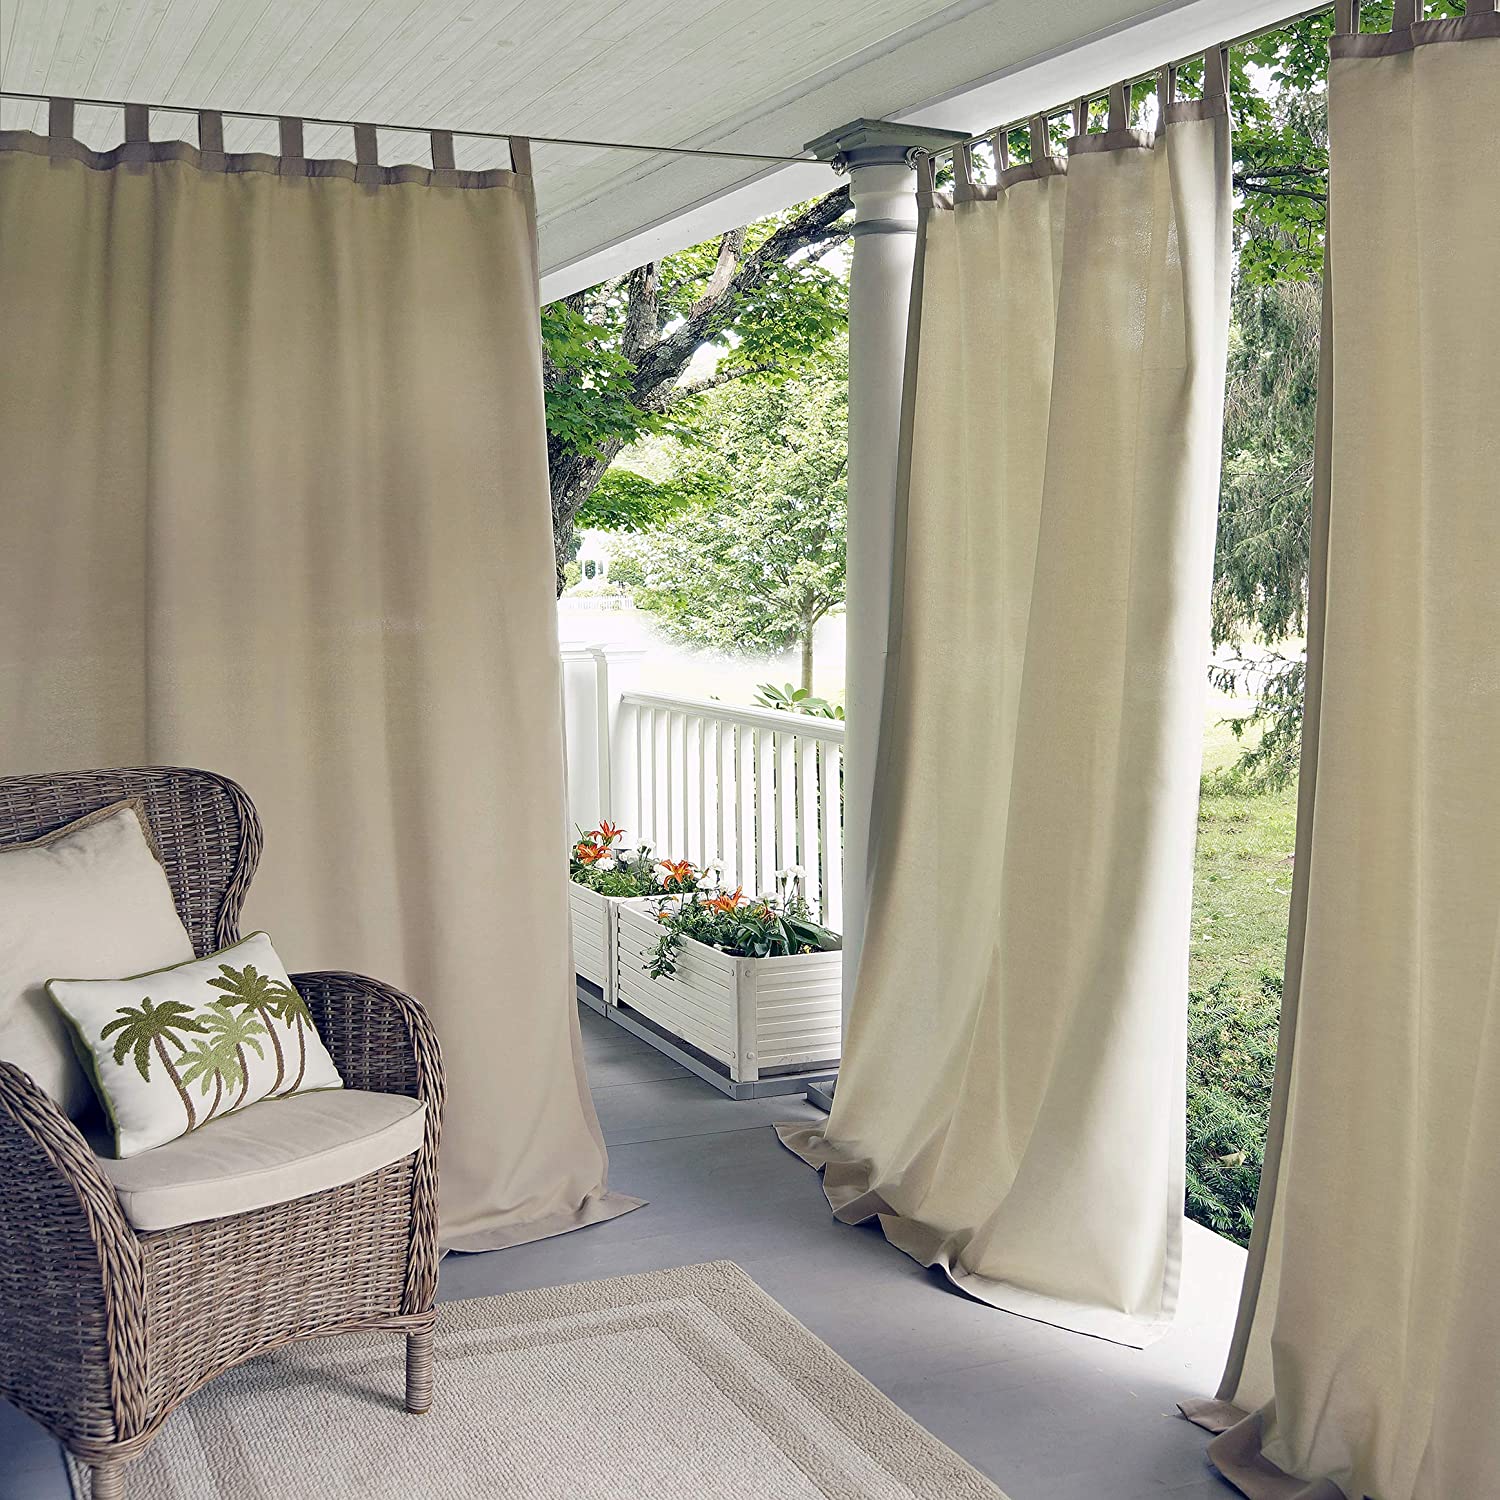 Top 5 Best Fabric Outdoor Curtains [2022 Review] - WindChimesGuide